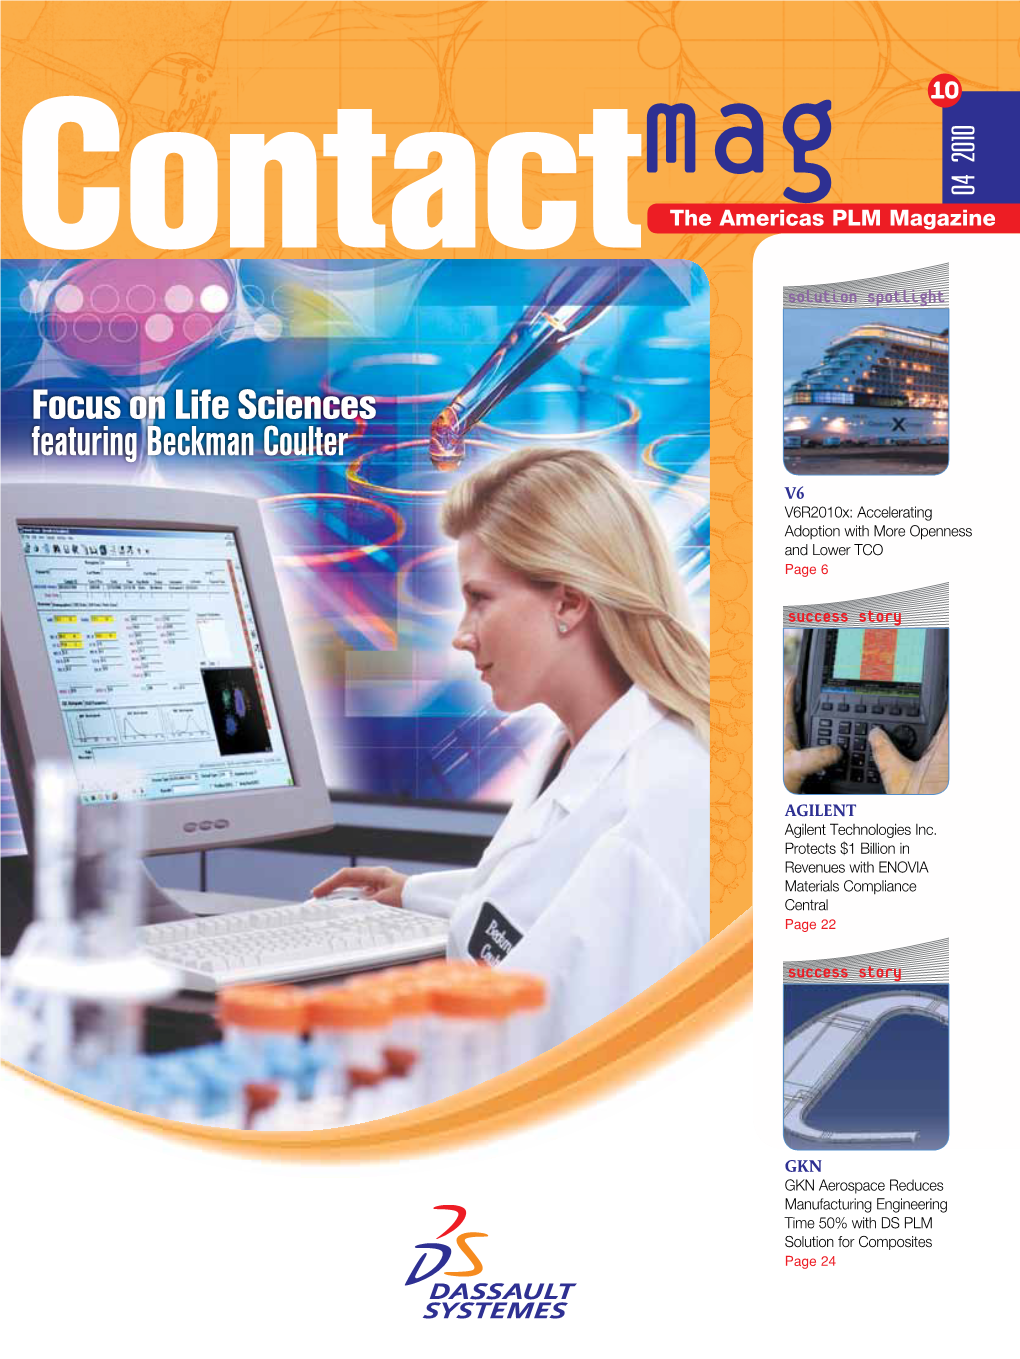 Focus on Life Sciences Featuring Beckman Coulter